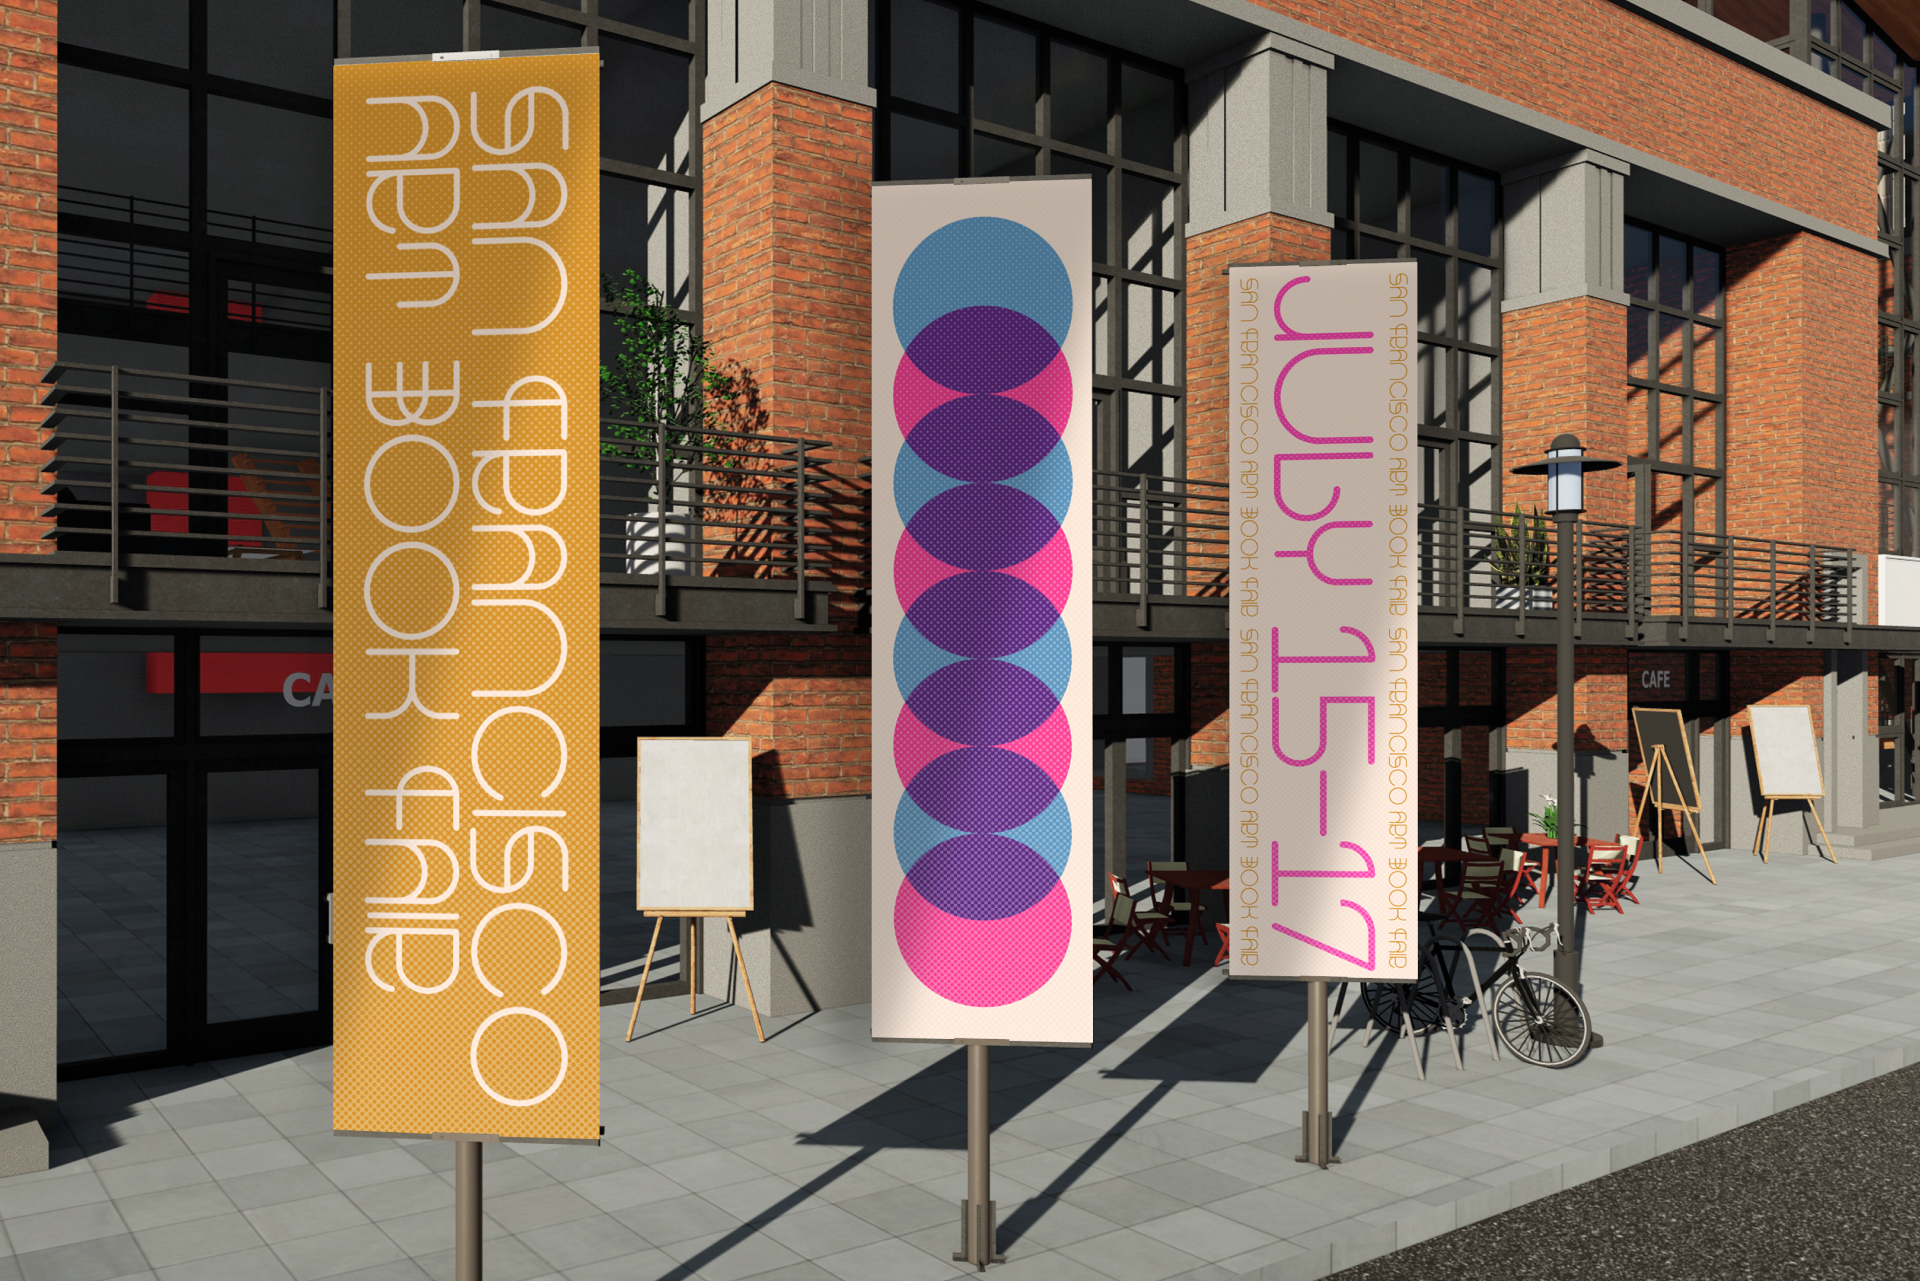 Spatial Design for the event: banners outside